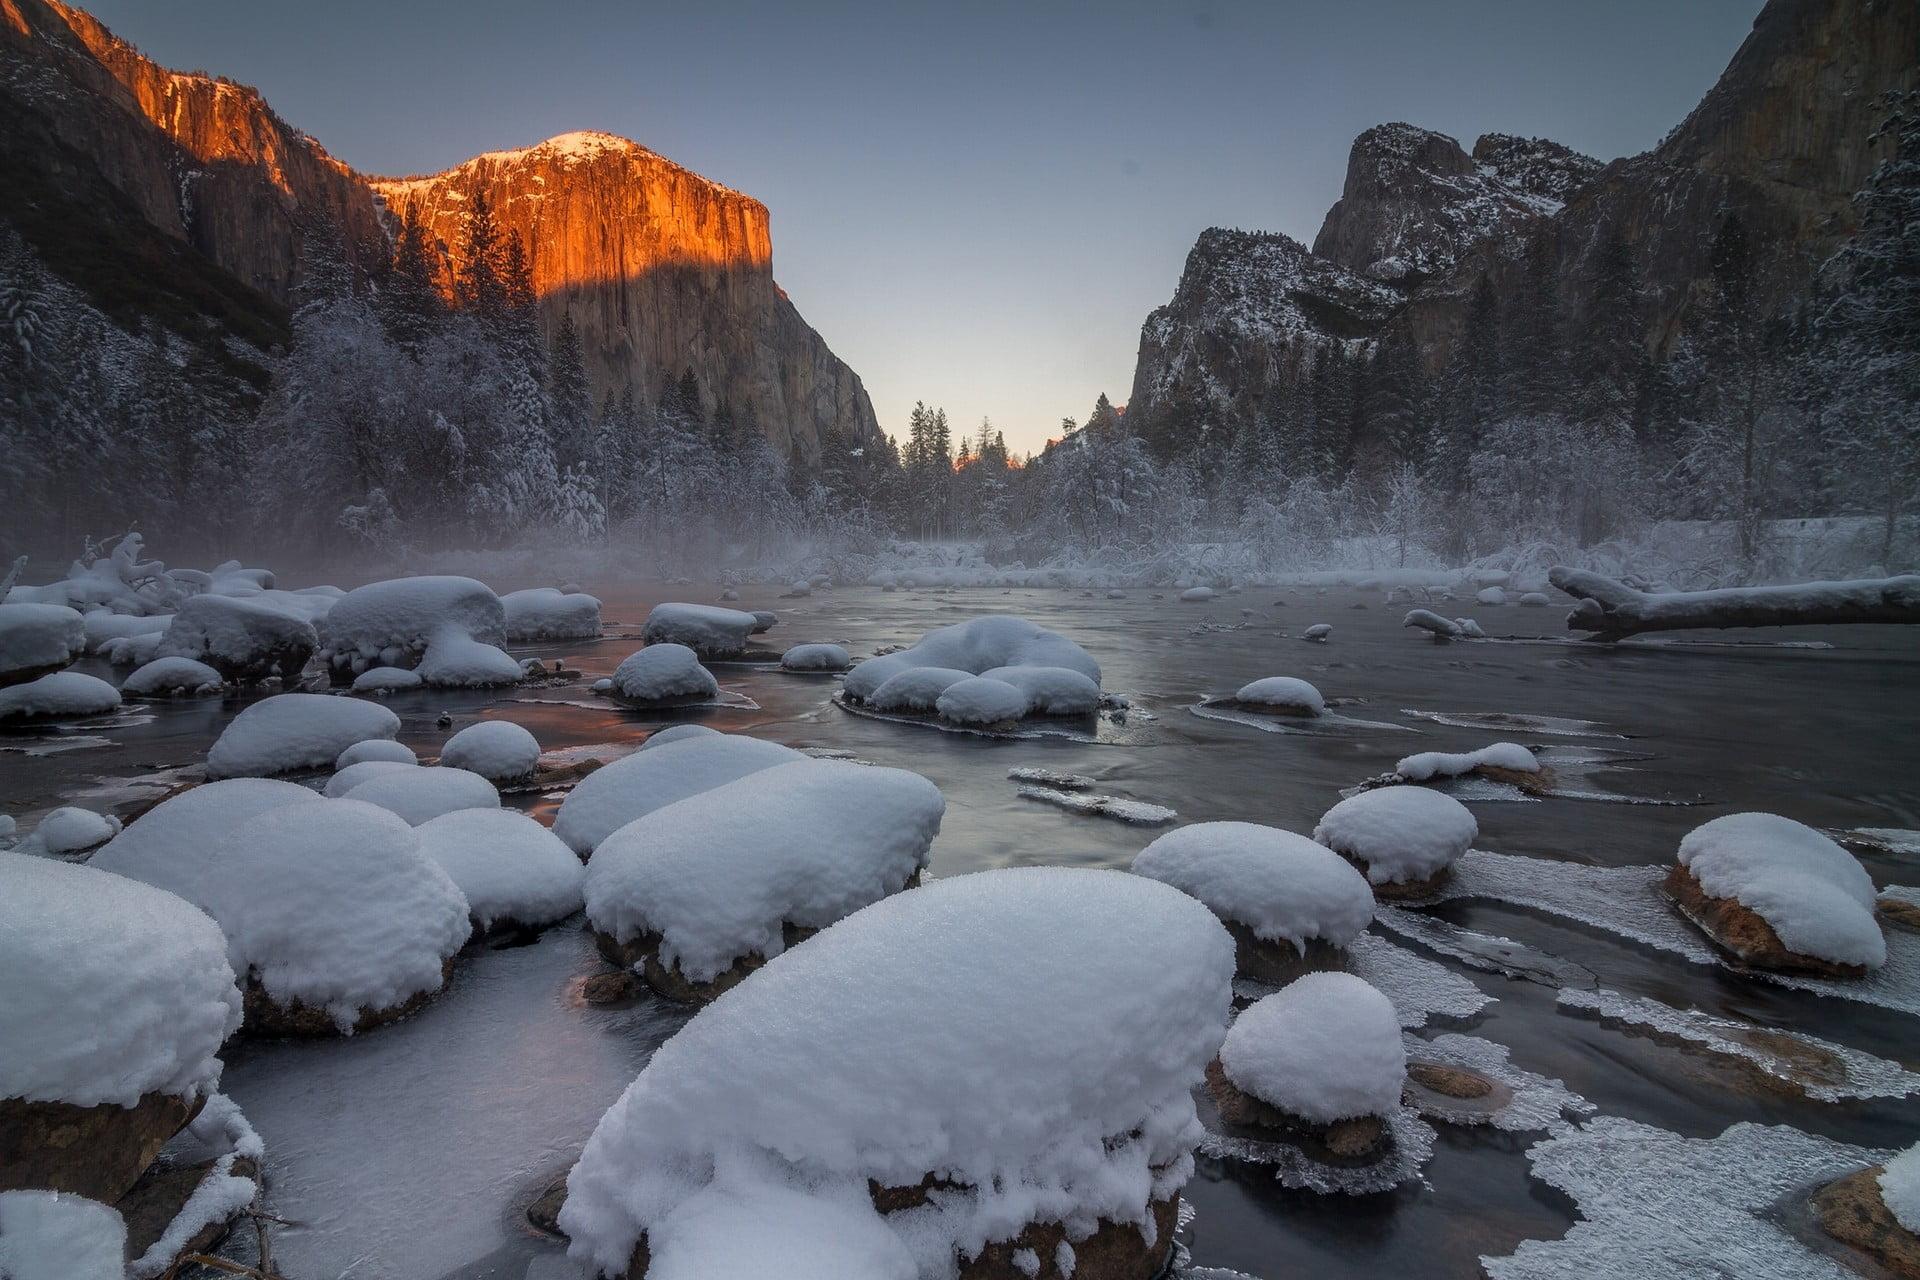 Snow Covered Stones, Landscape, Trees, Winter, Yosemite National Park HD Wallpaper